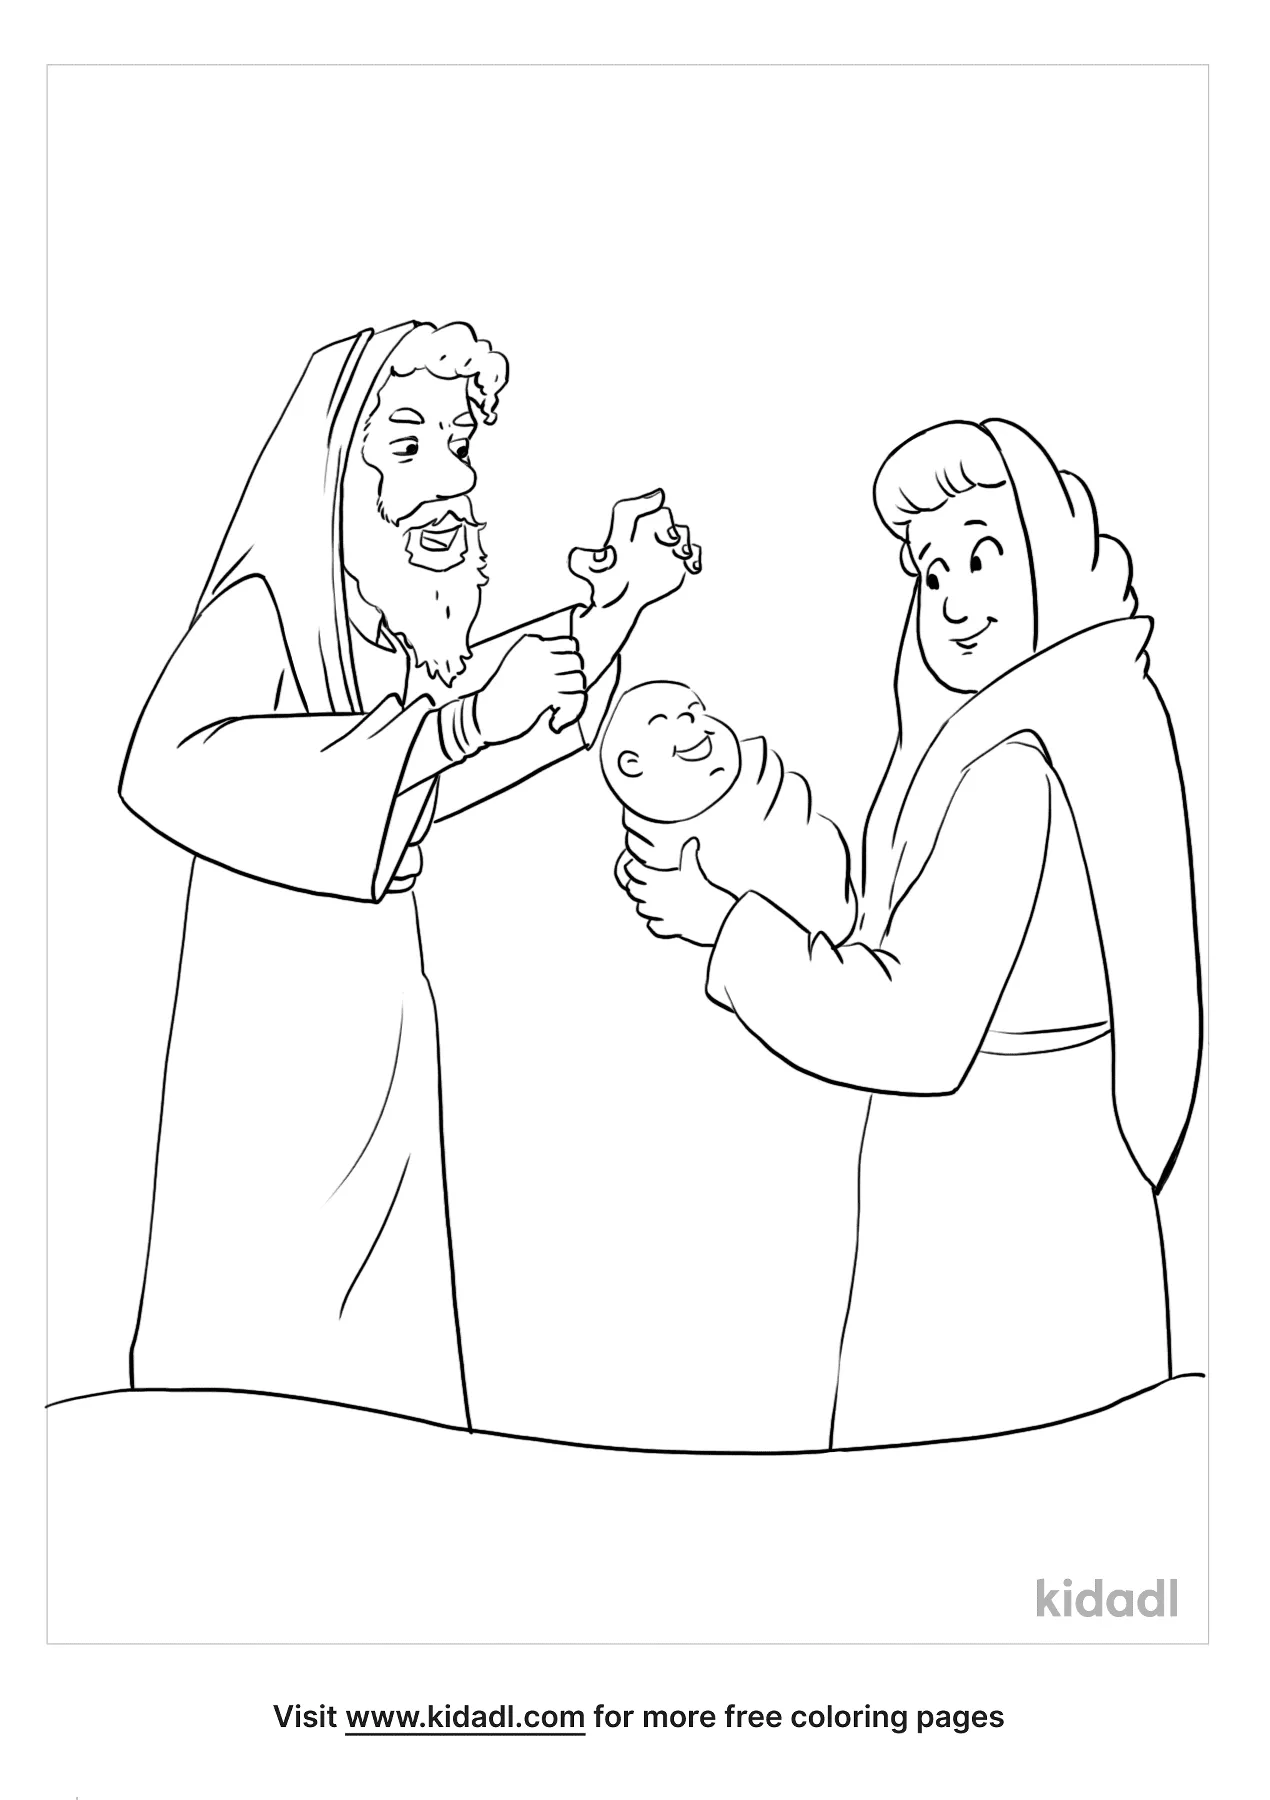 Abraham And Sarah Coloring Pages   Free Bible Coloring Pages   Kidadl